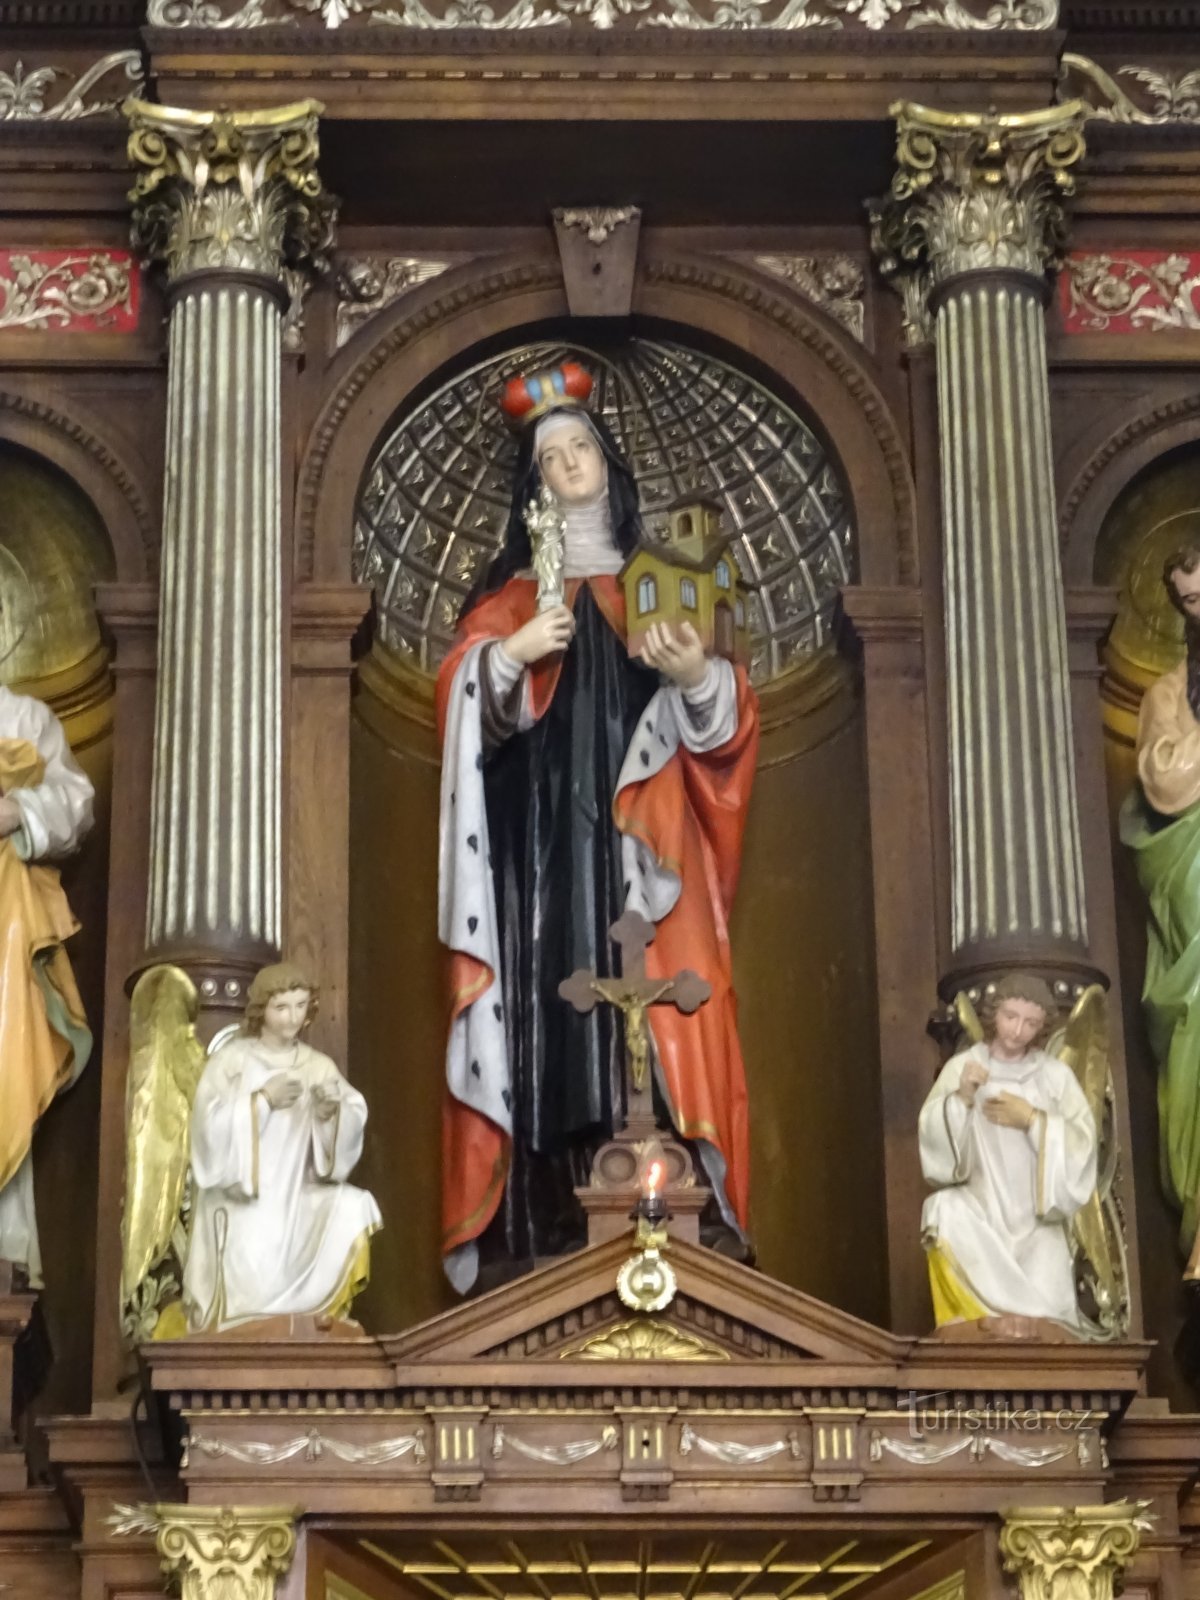 St. Hedwig on the altar